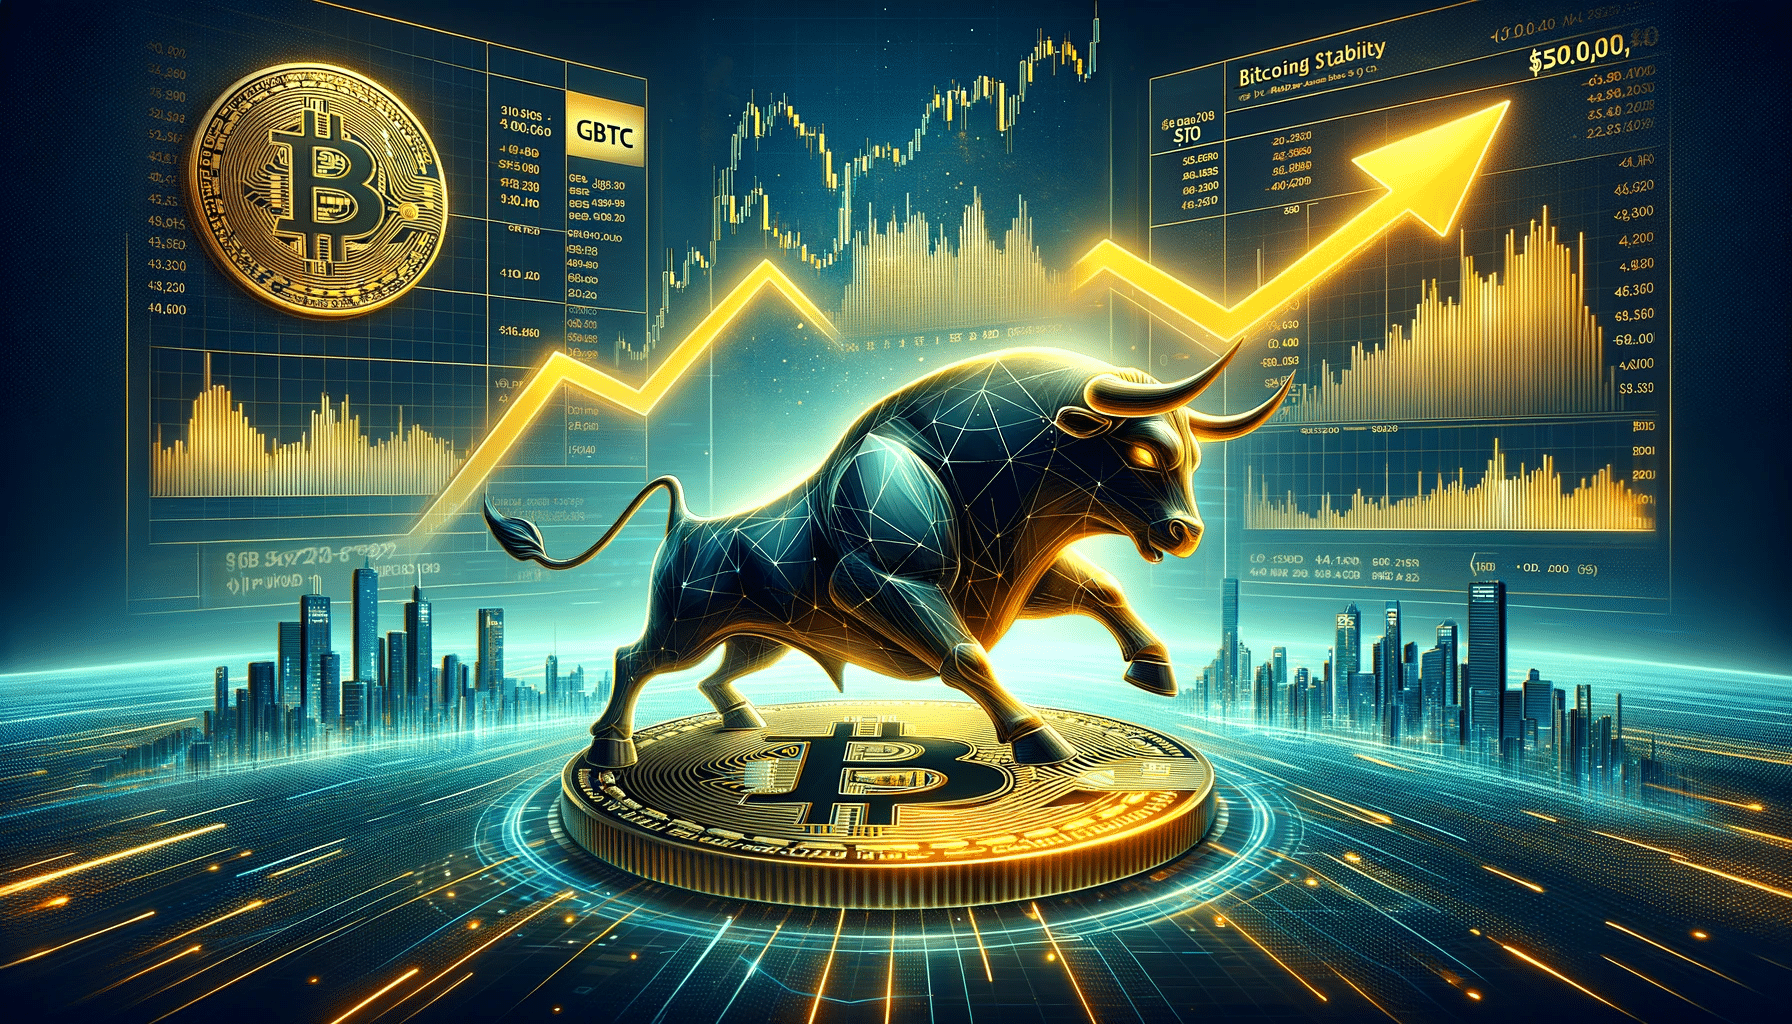 Bitcoin Absorbs Selling Pressure from GBTC as BTC Stays at $40,000 Landmark; Will the Bulls Return and Push Price to $50,000?